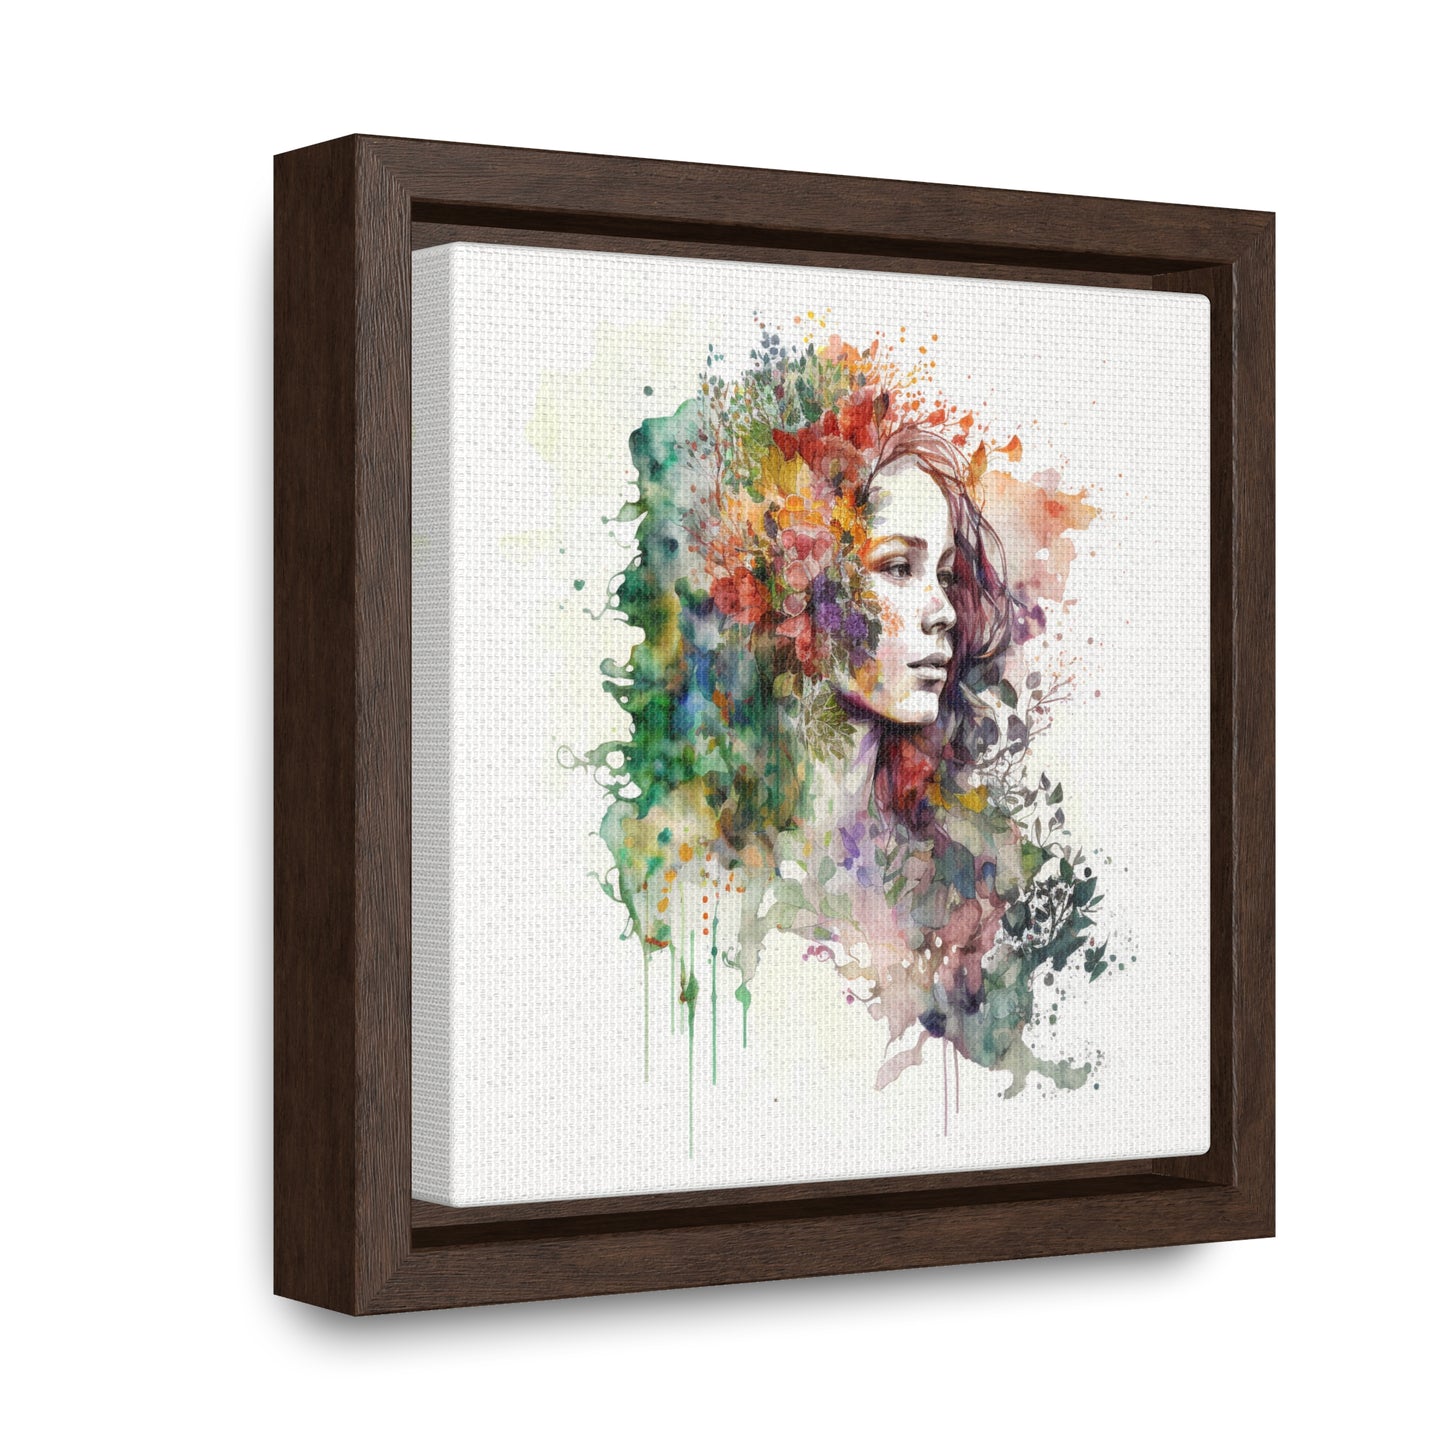 Gallery Canvas Wraps, Square Frame Mother Nature Bright Spring Colors Realistic Watercolor 3